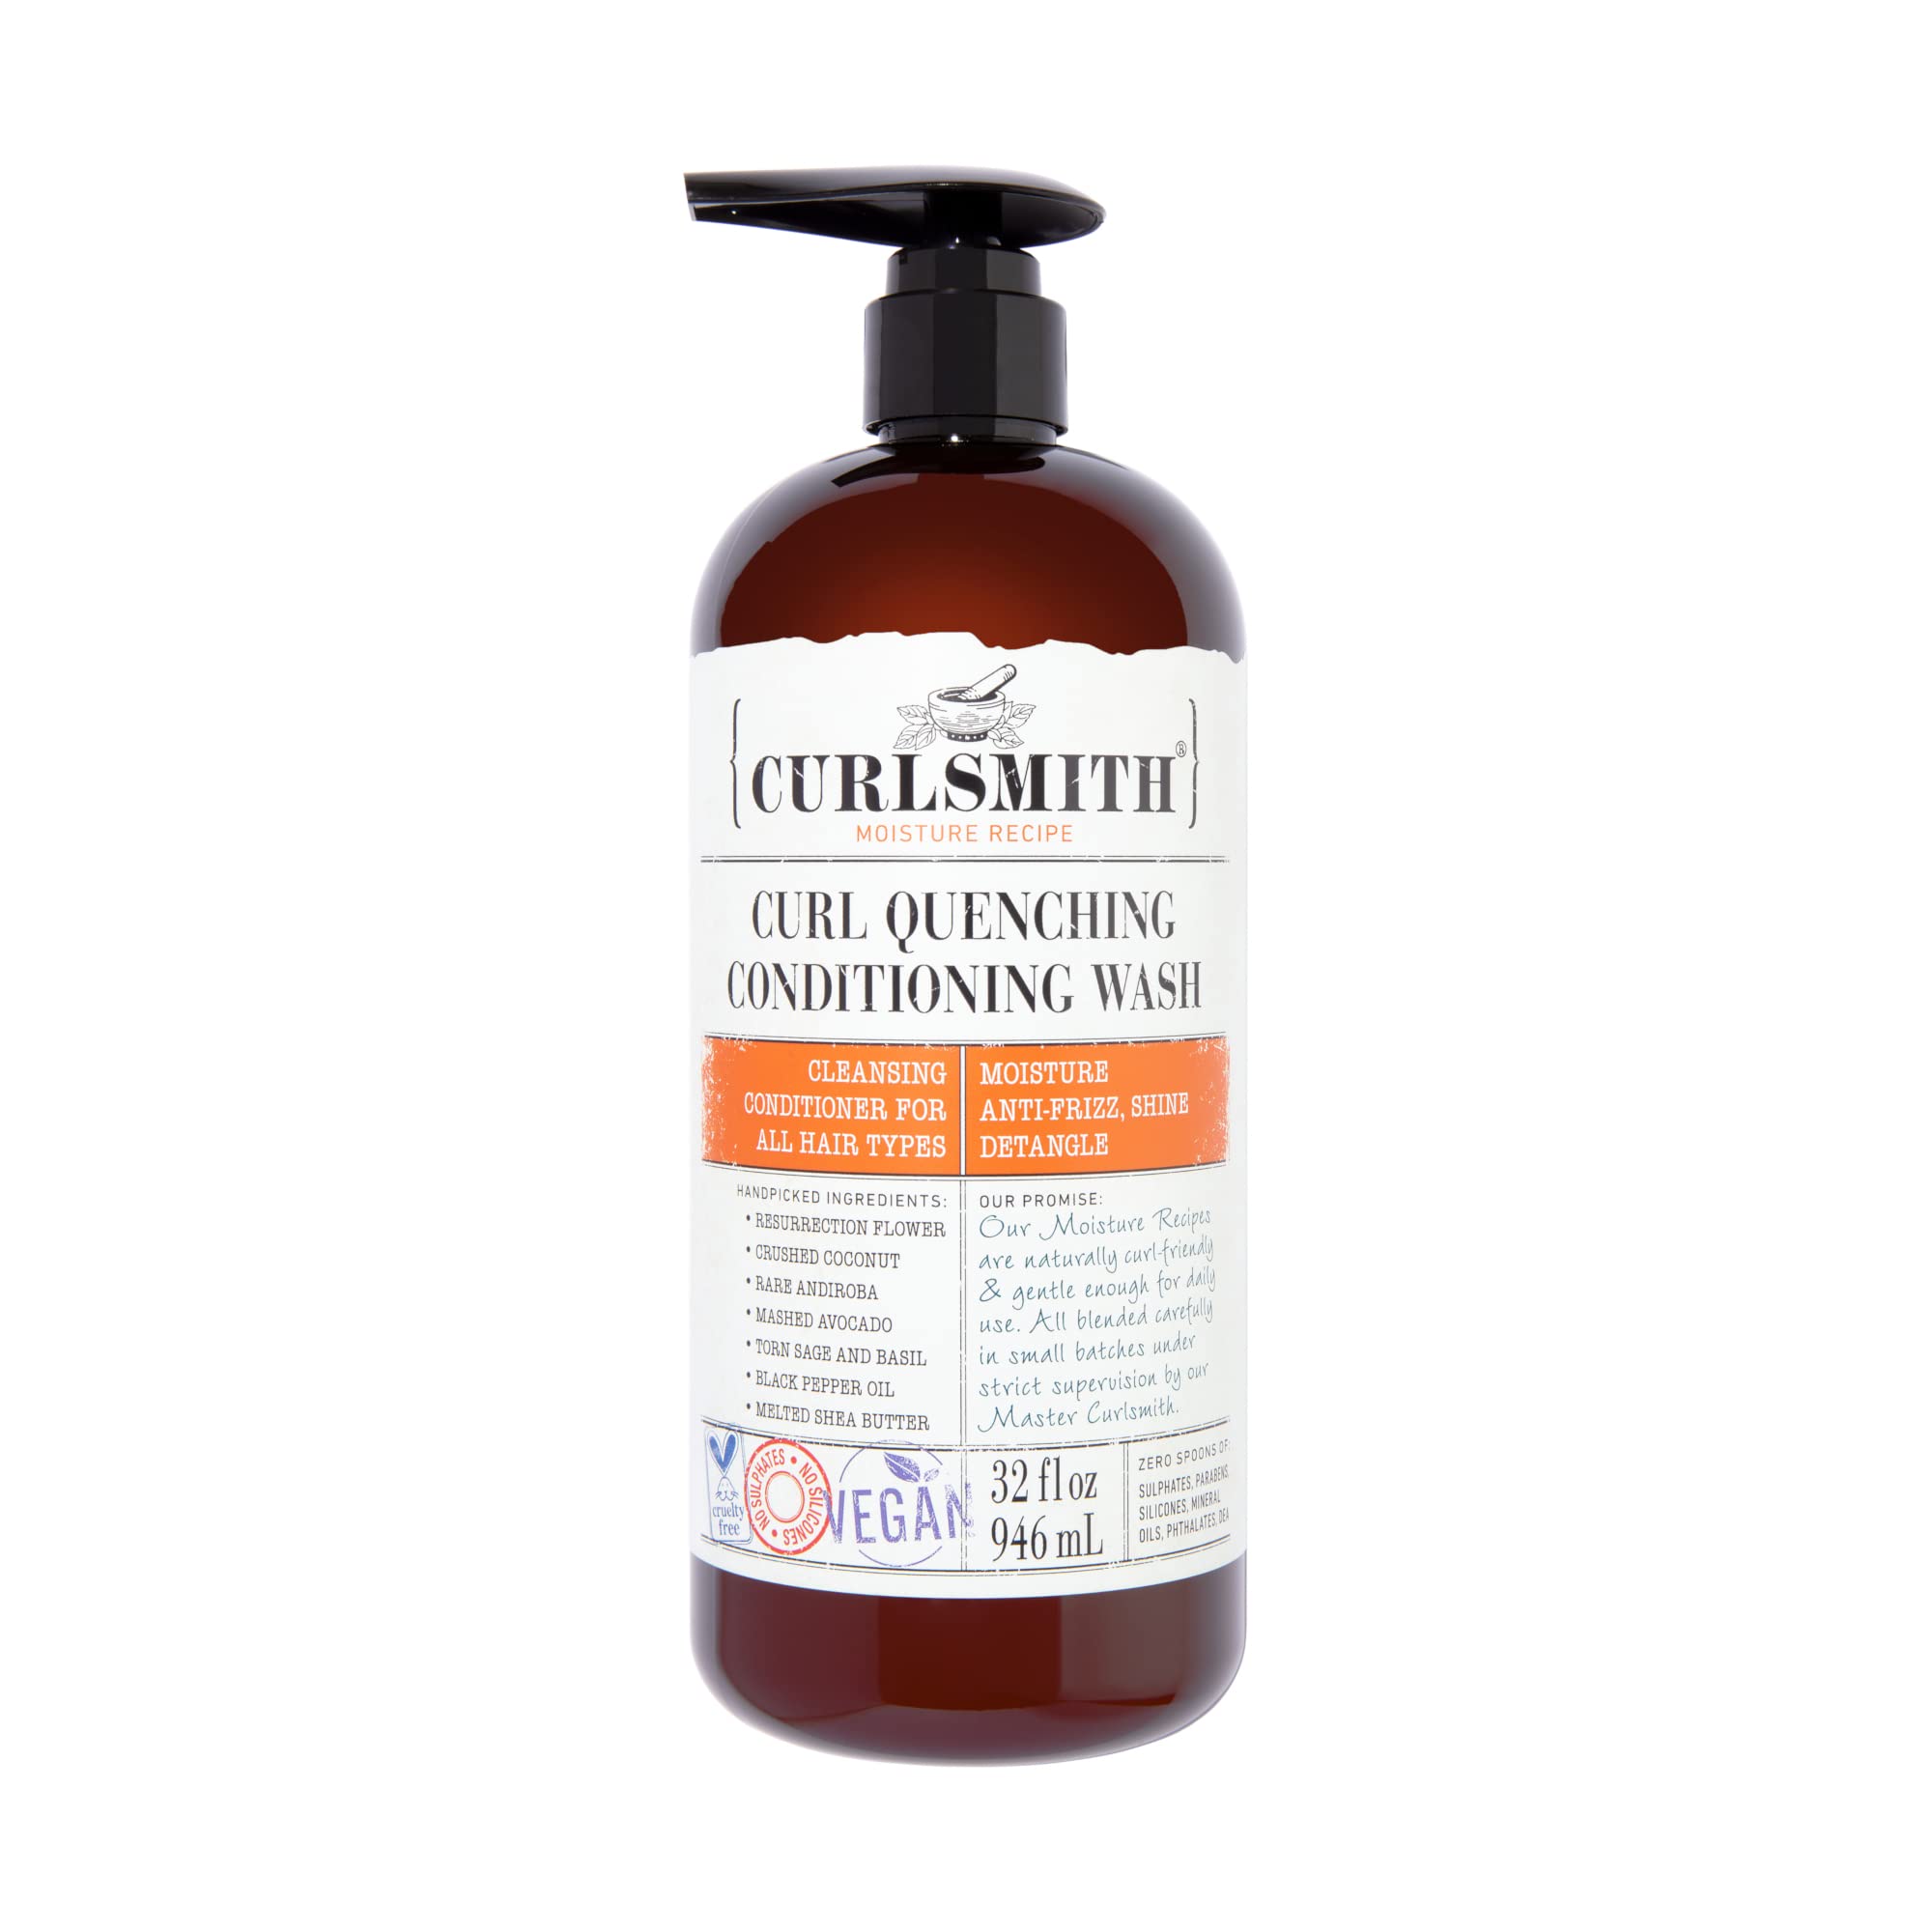 CURLSMITH - Curl Quenching Conditioning Wash (32 oz)